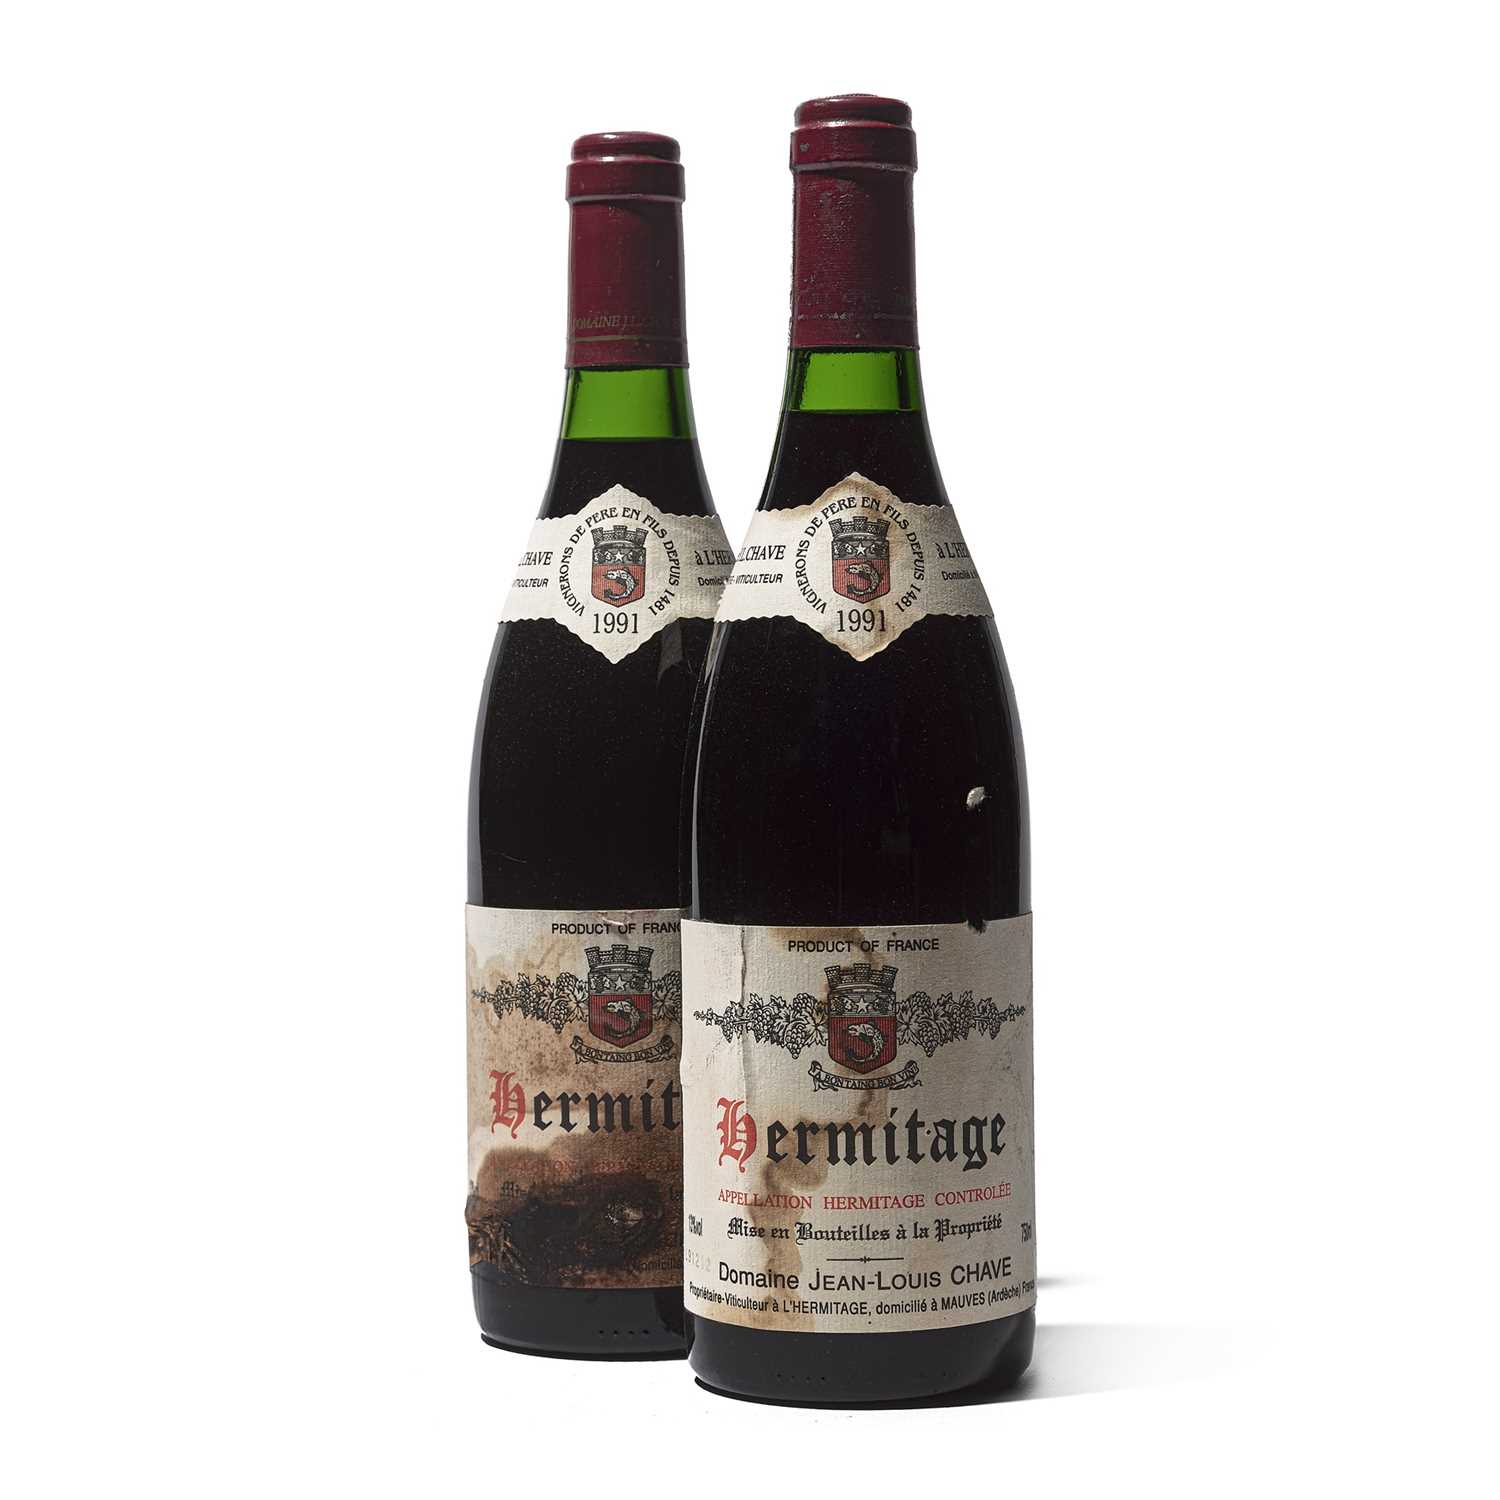 Lot 60 - 2 bottles 1991 Hermitage Chave